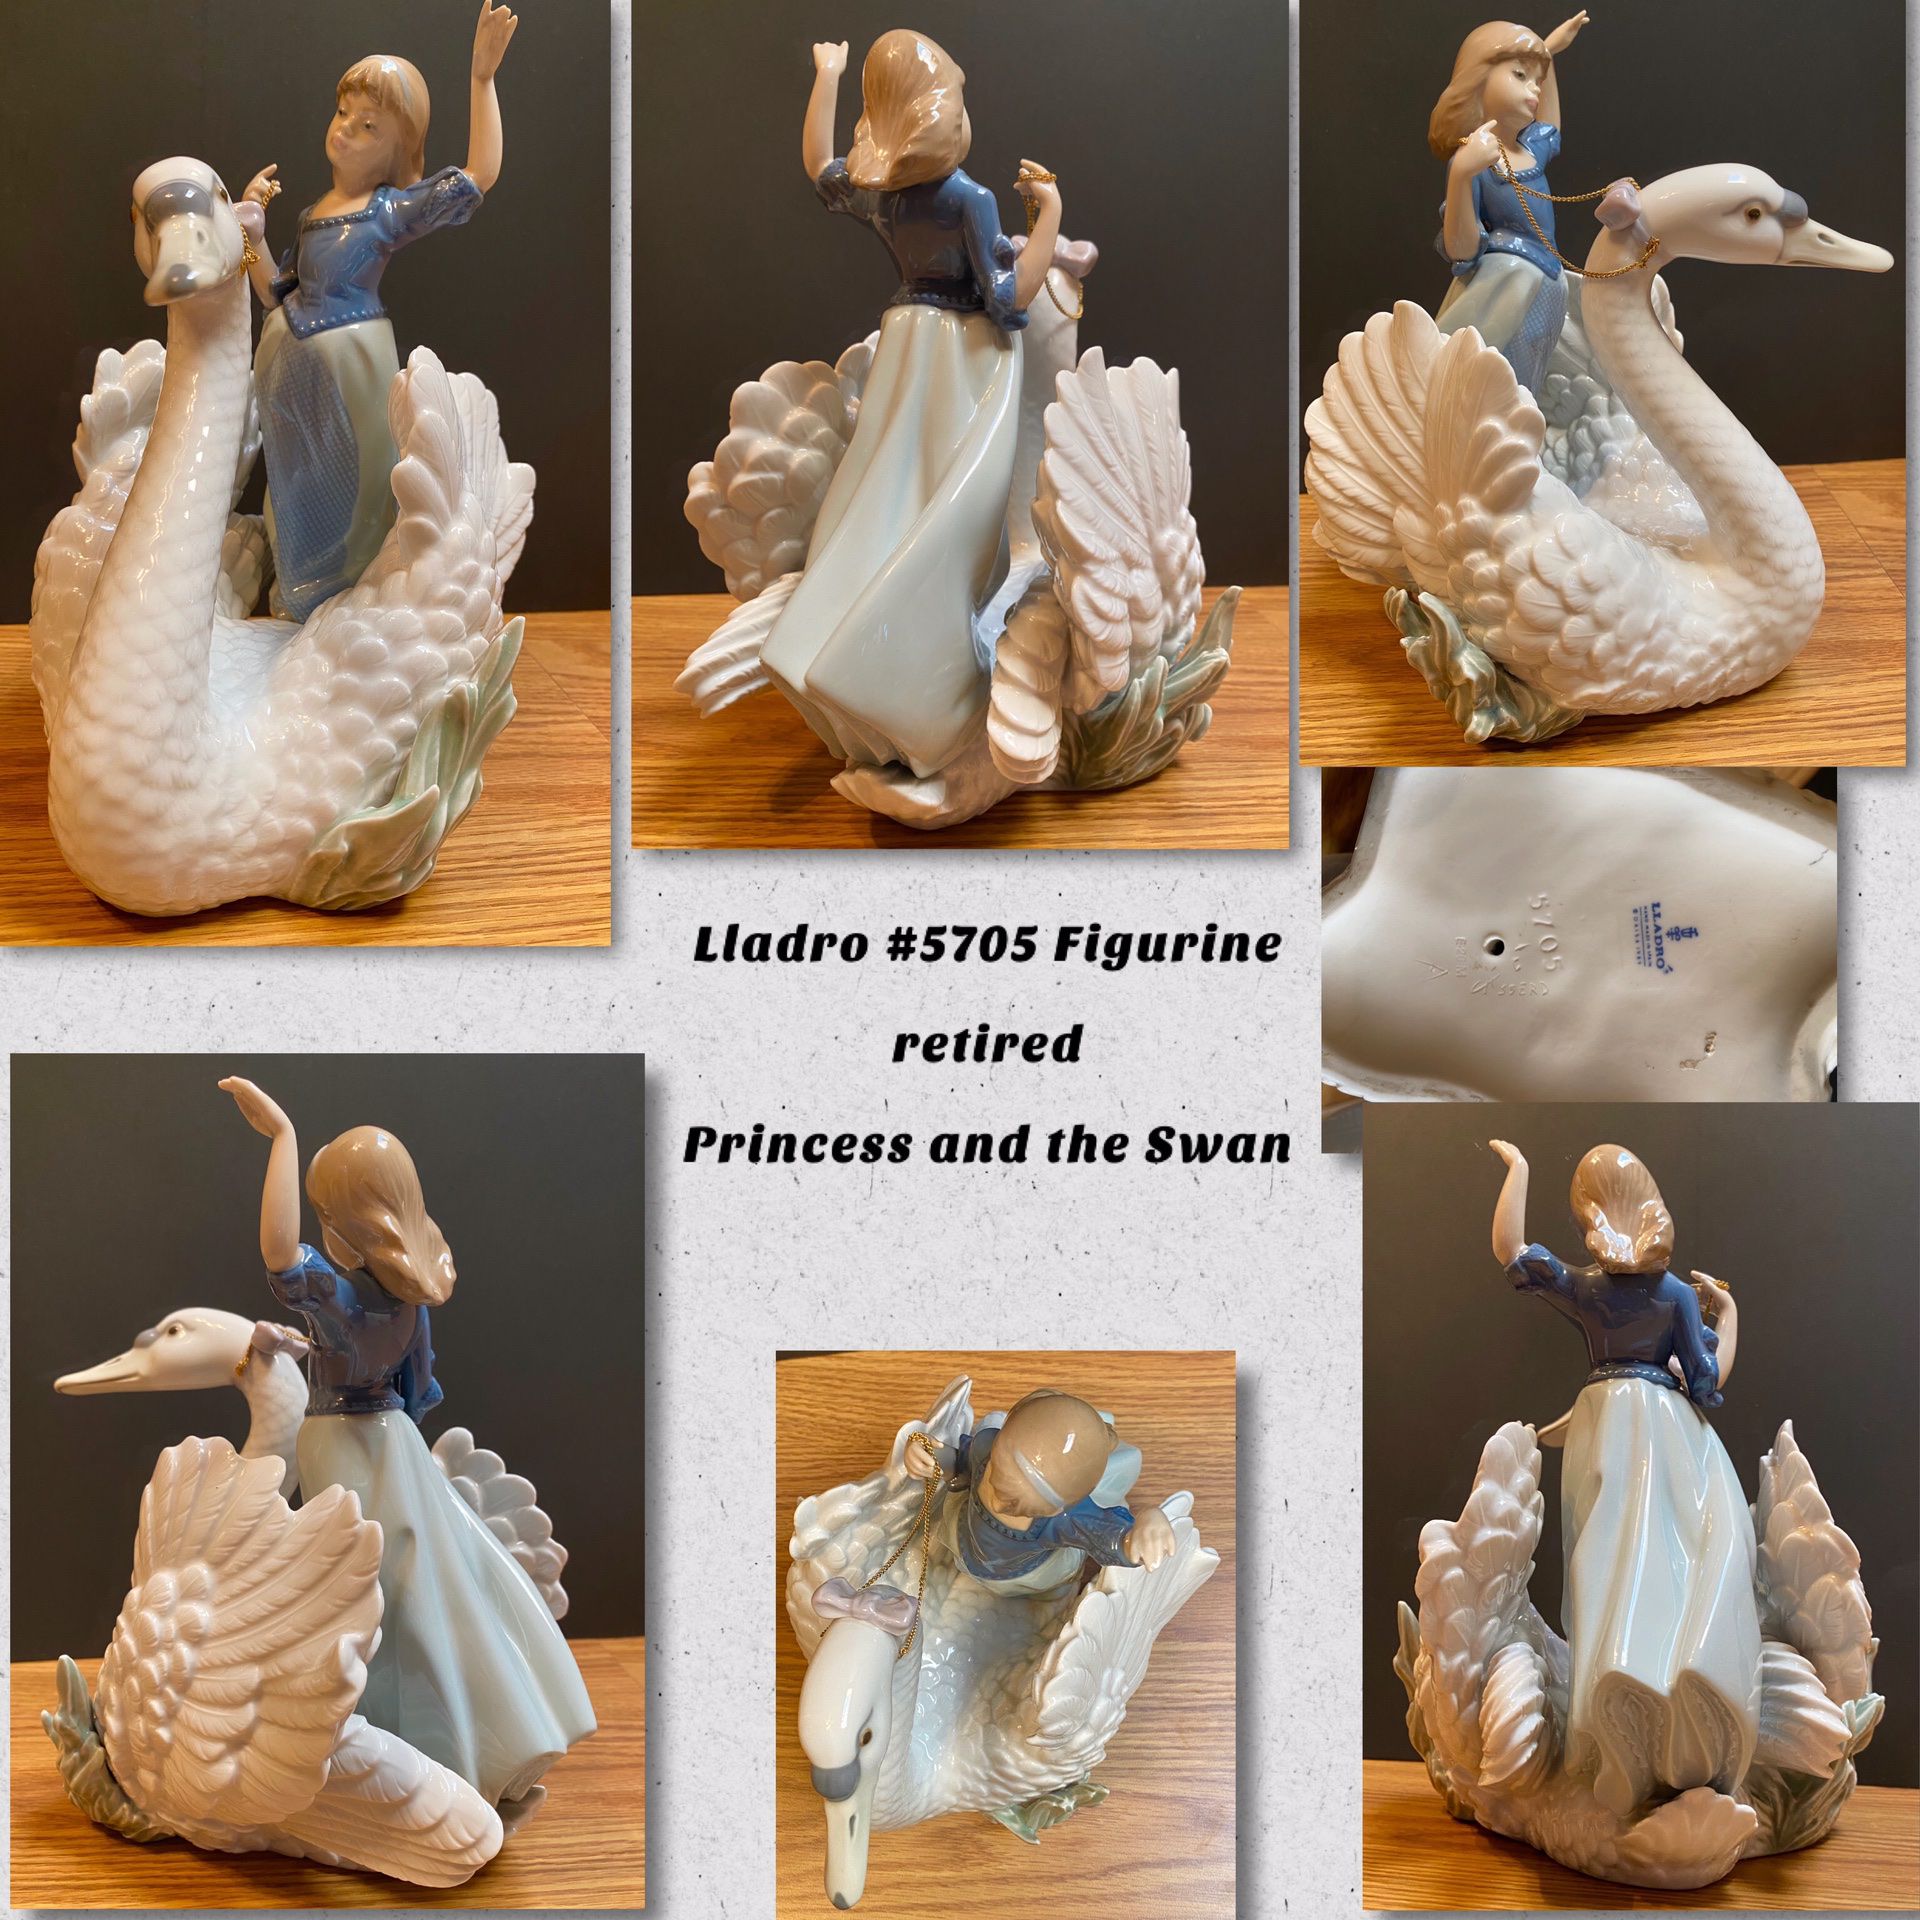 Lladro Figurine “The Princess and the Swan” #5705 Retired